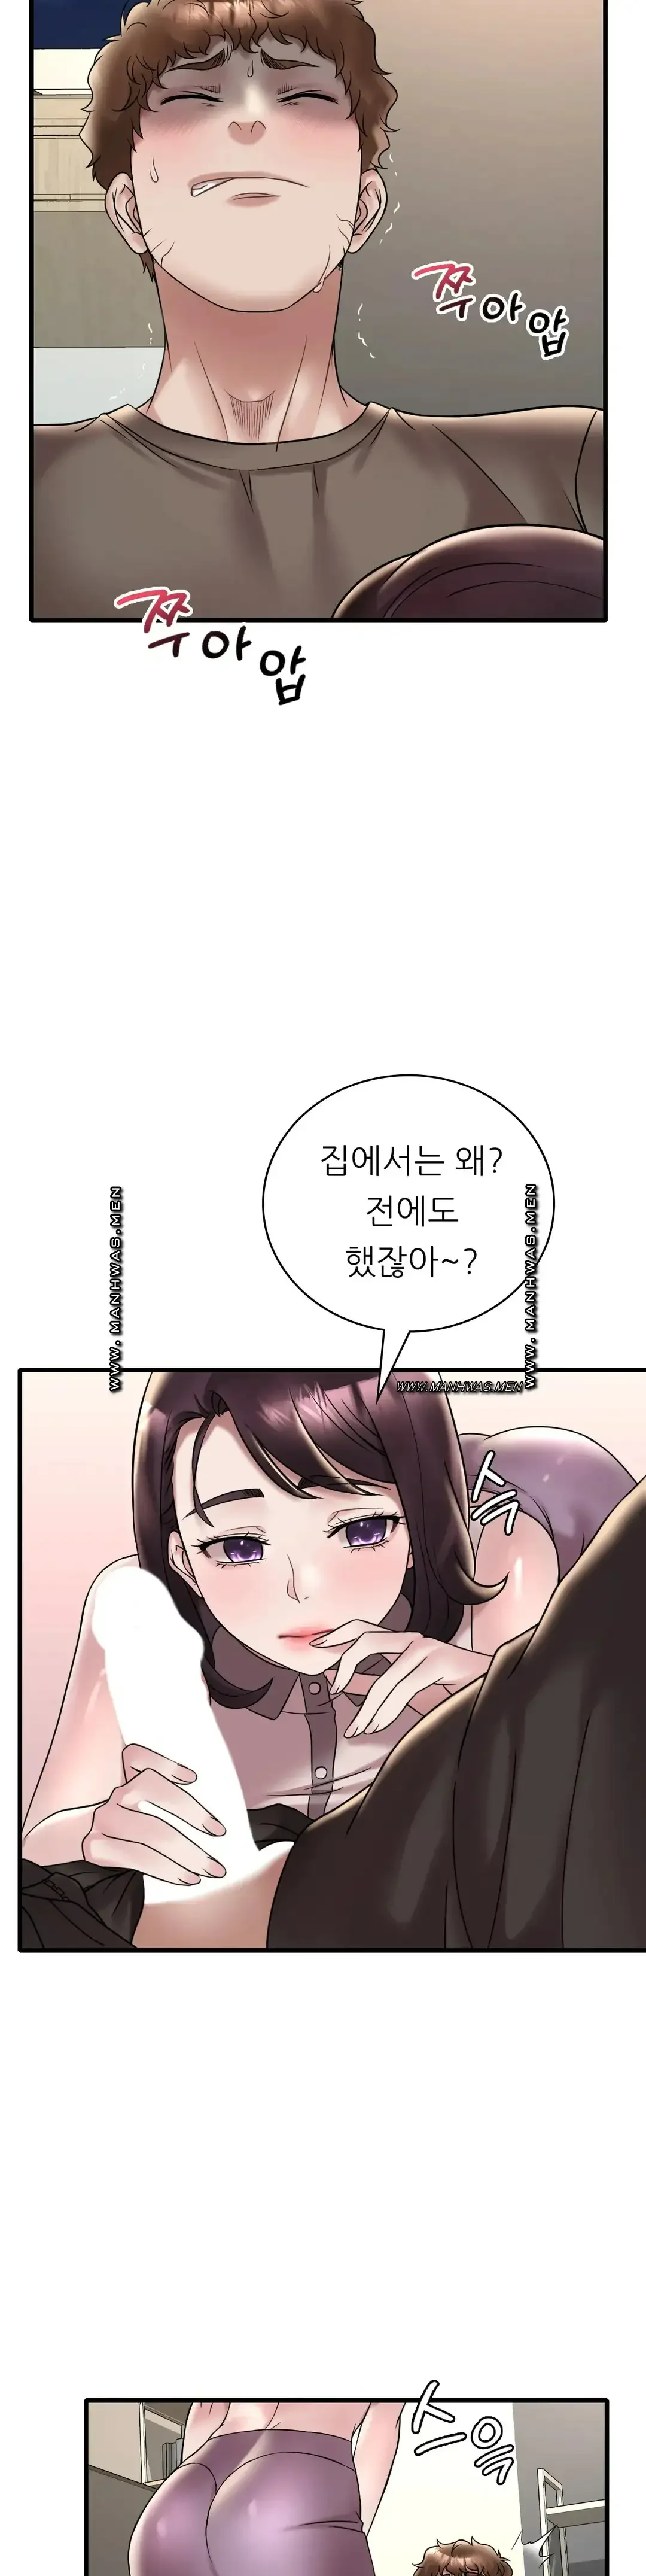 she-wants-to-get-drunk-raw-chap-34-19